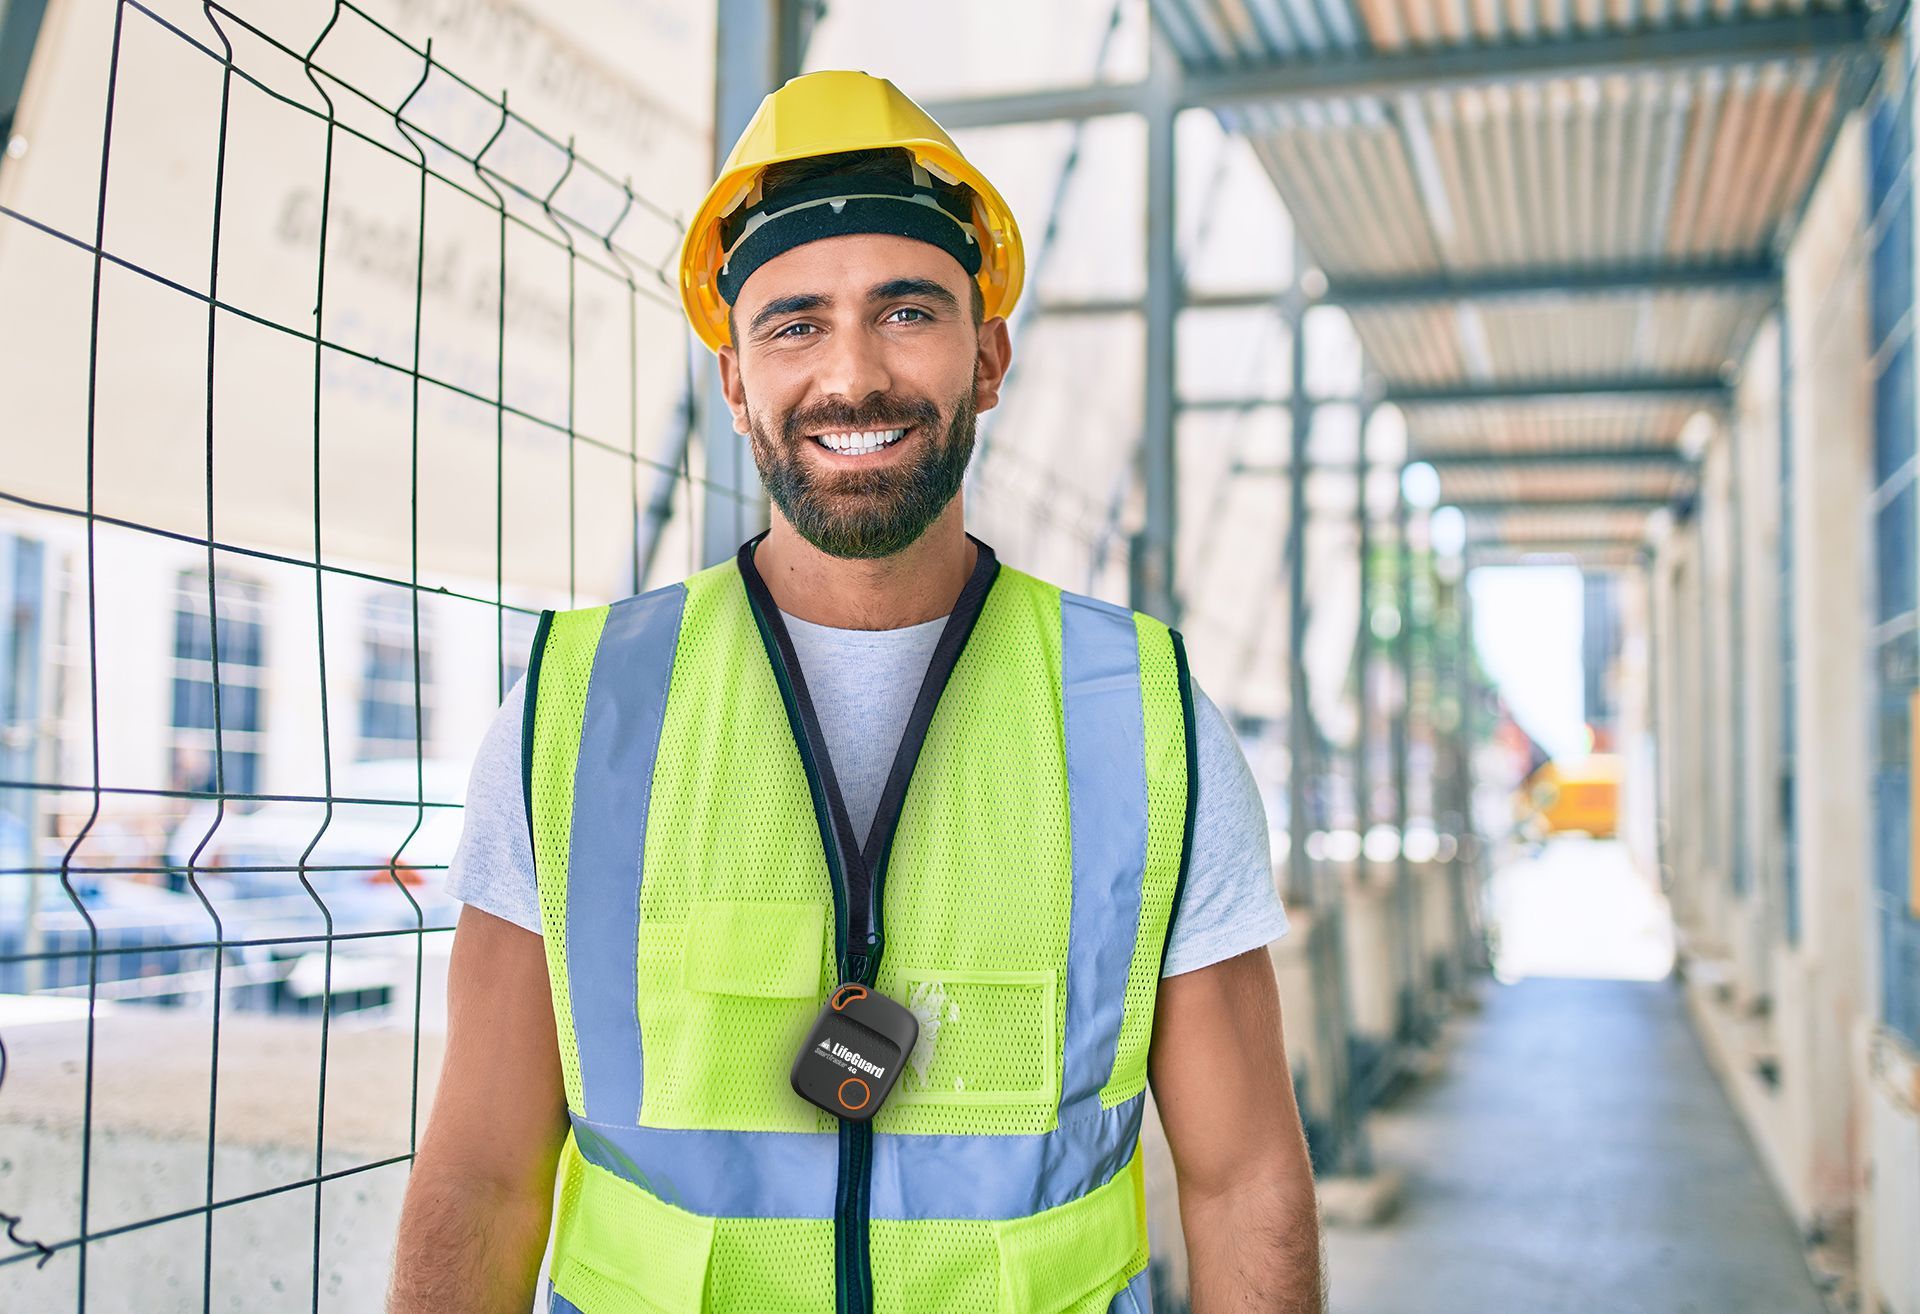 A construction worker wearing a hard hat and safety vest is smiling at the camera.